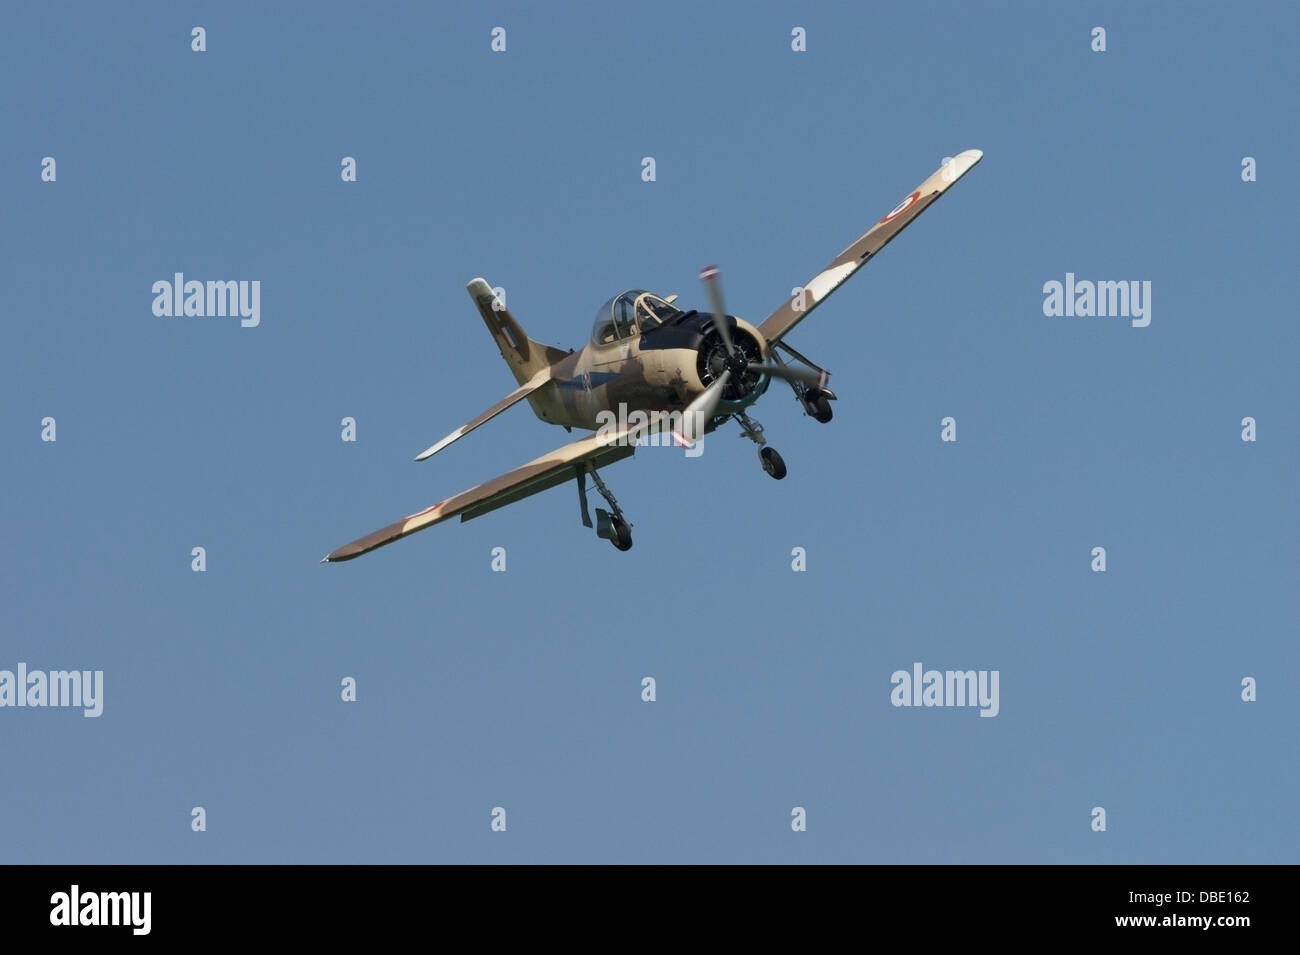 T-28 Fennec with landing gear down Stock Photo